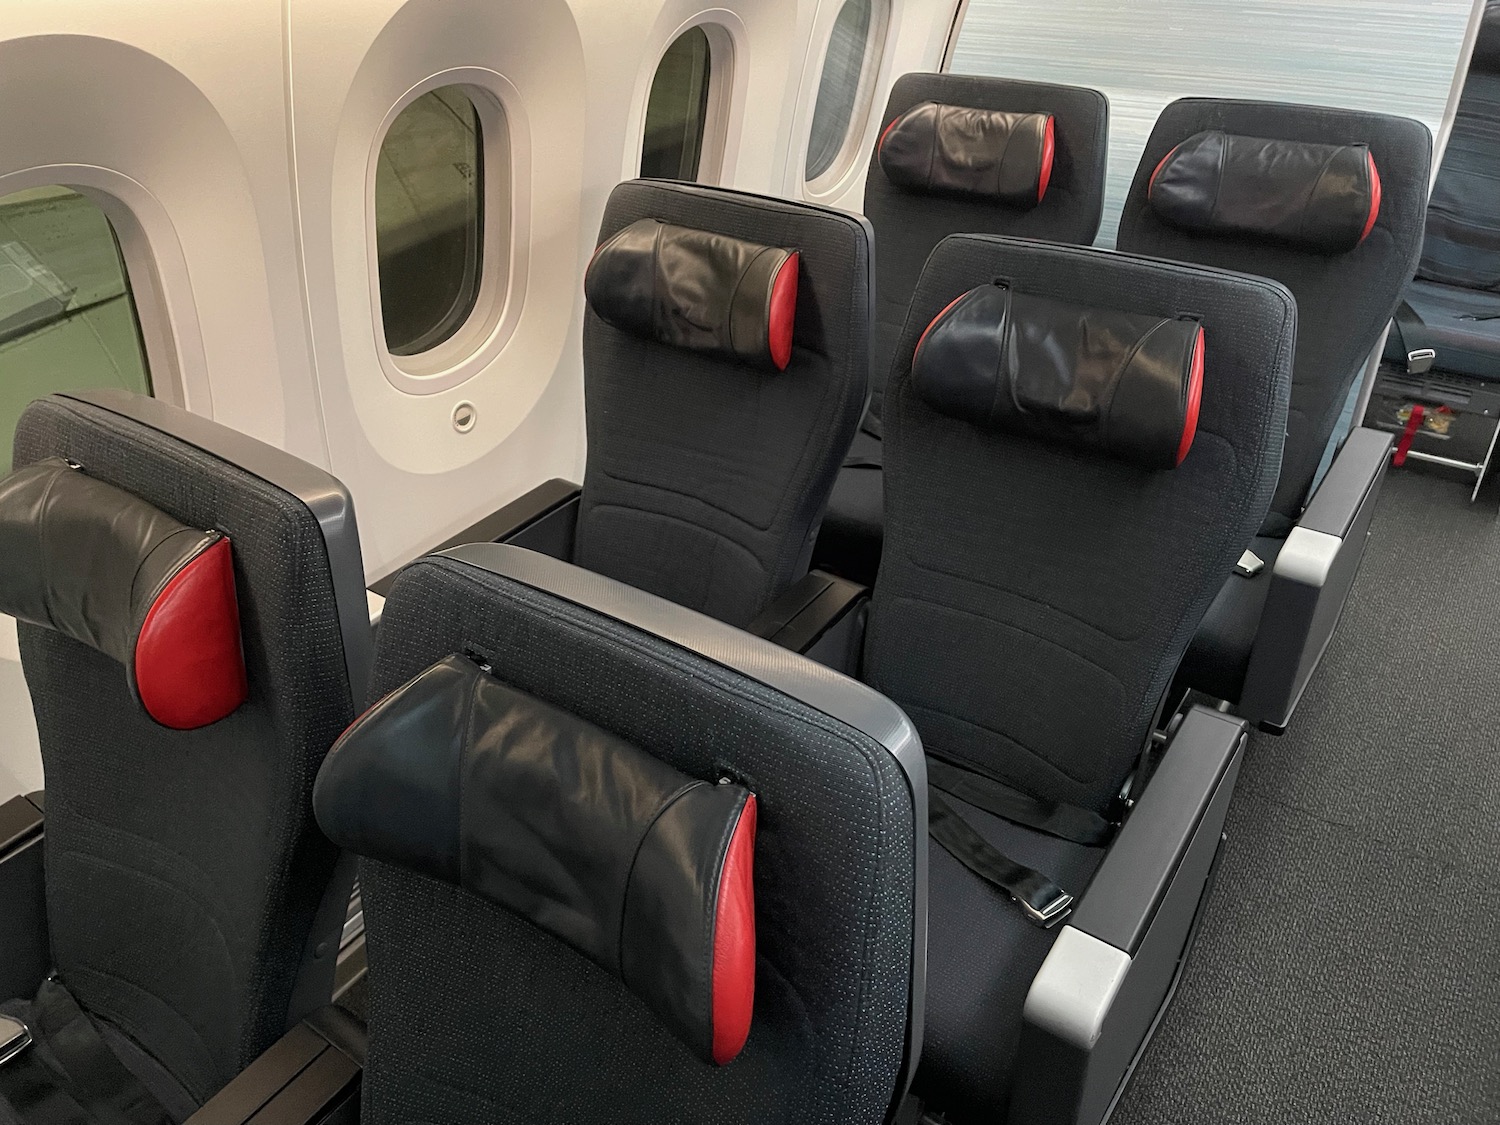 a row of black and red seats in a plane